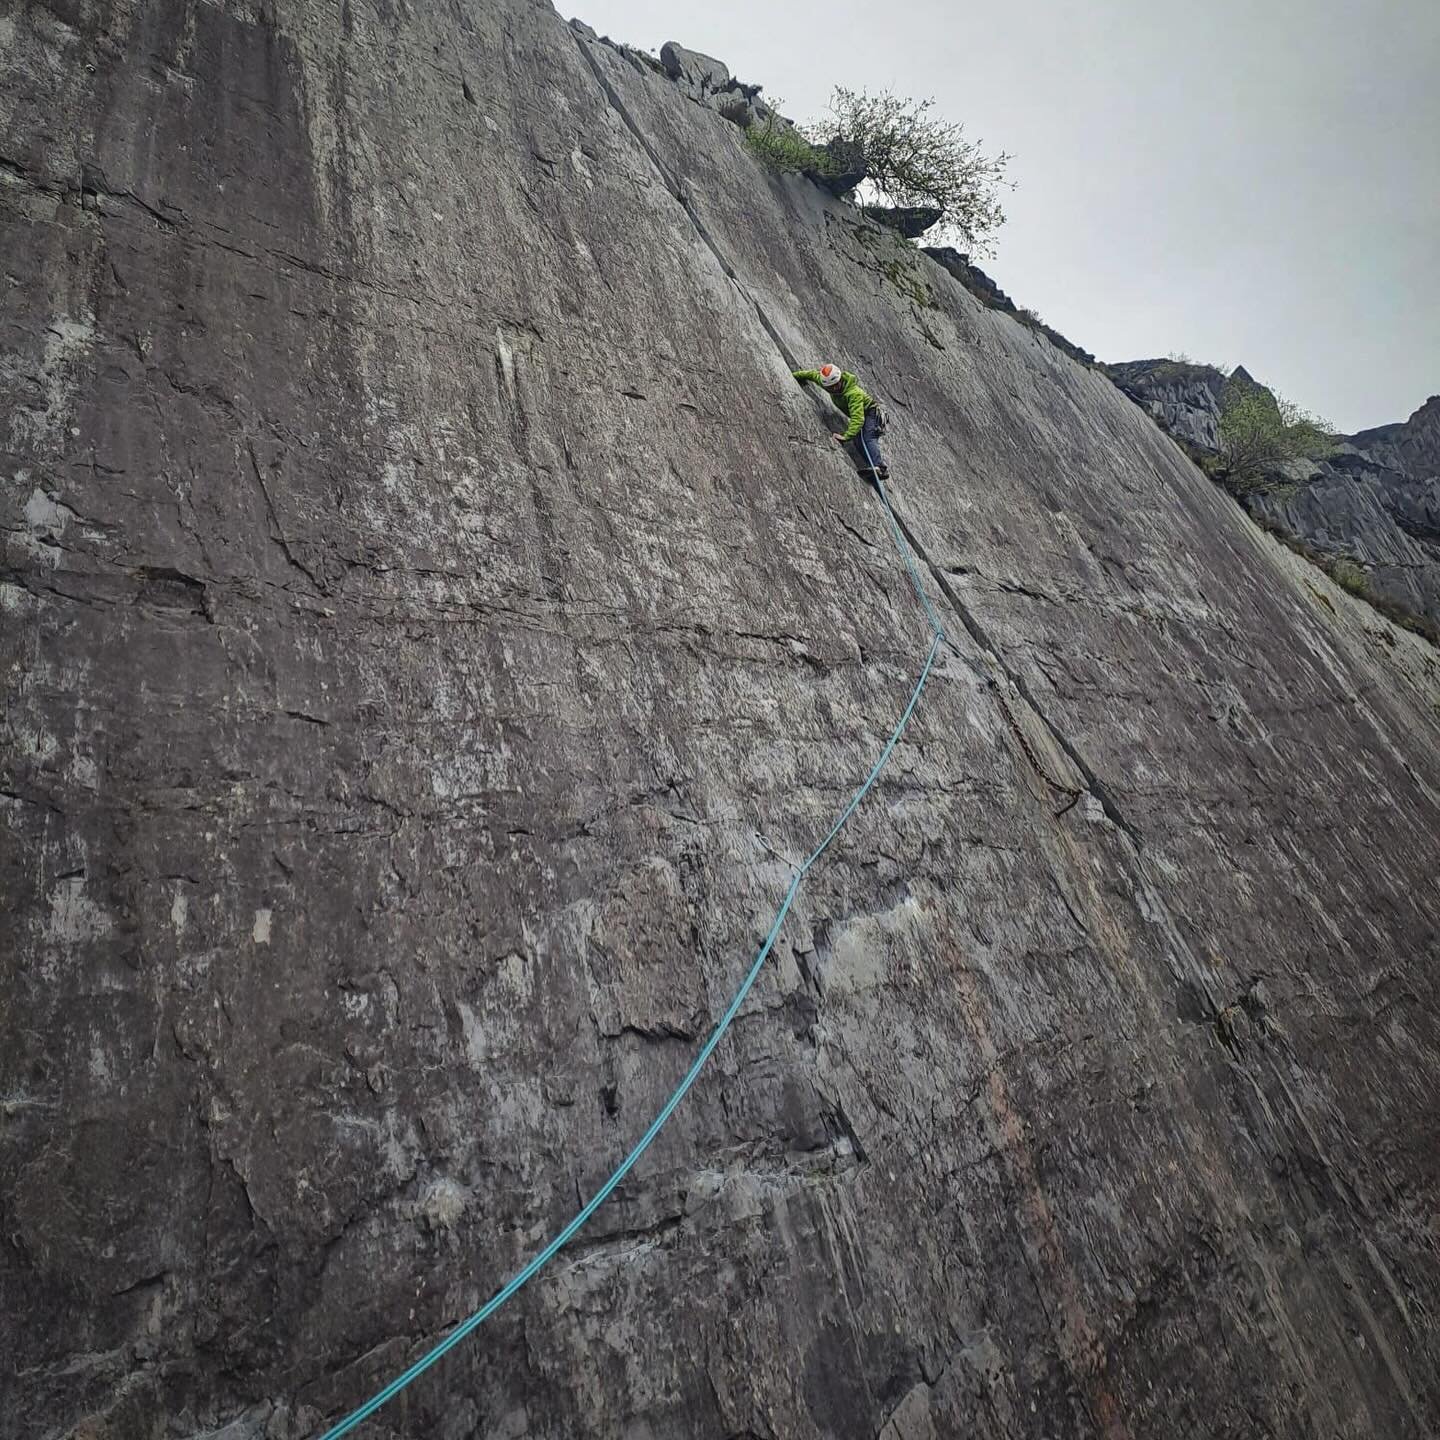 The after work climbing sessions have been in full flow this week 😎

#slate #dinorwigquarry #northwalesclimbing #rockclimbing #eryri